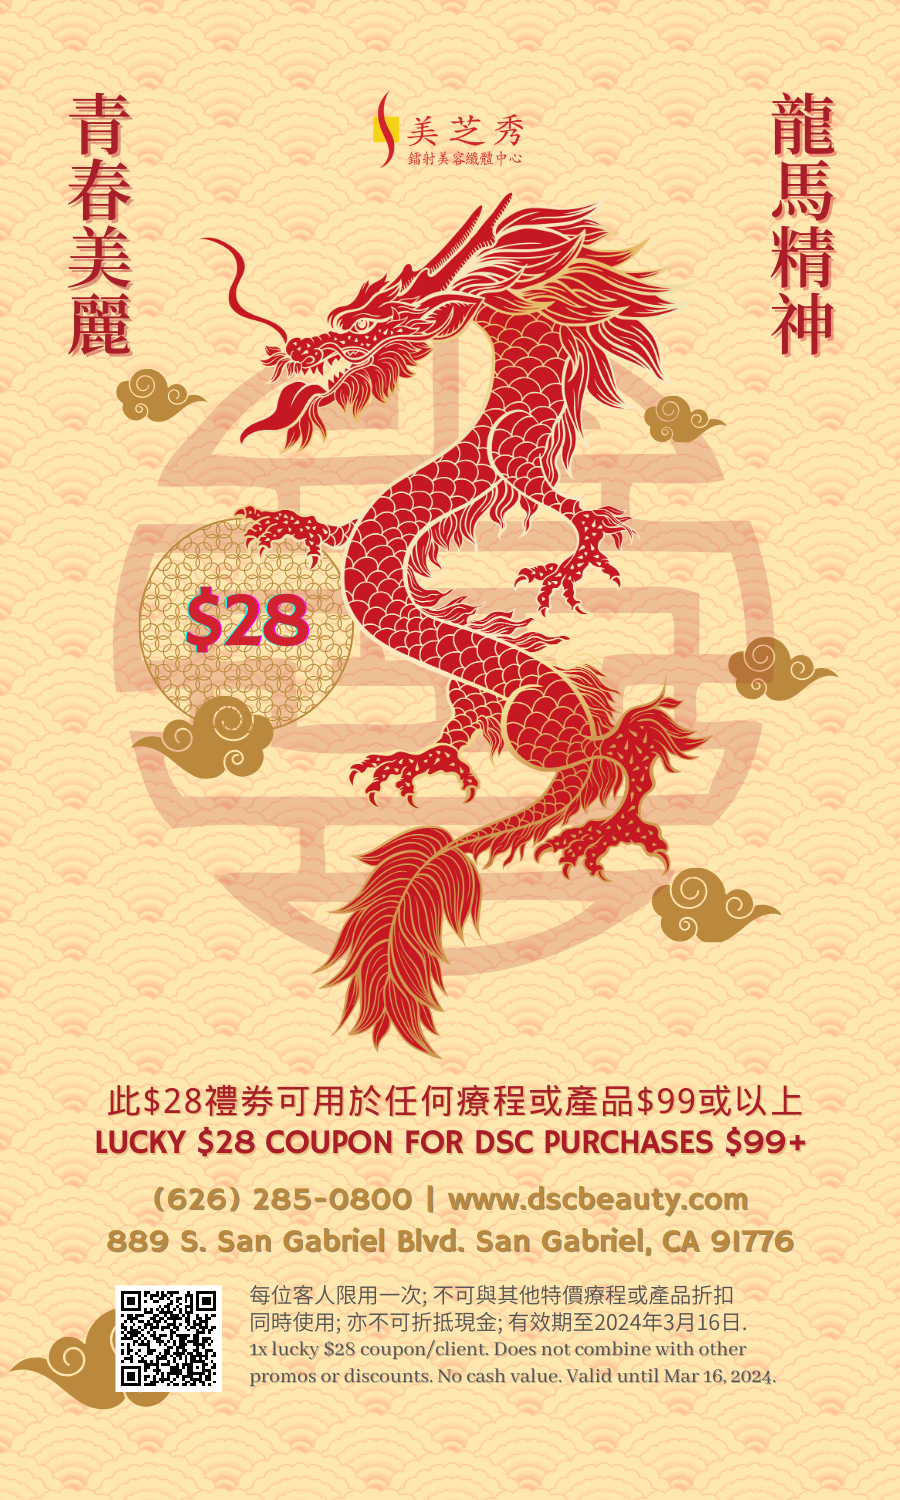 DSC Lucky Red Pocket 2024 Year of the Dragon graphic with red dragon and gold clouds holding a $28 in a ball, with the text "a red pocket for DSC purchases $99+" for use until March 16th 2024, does not combine with other promos or deals. no cash value